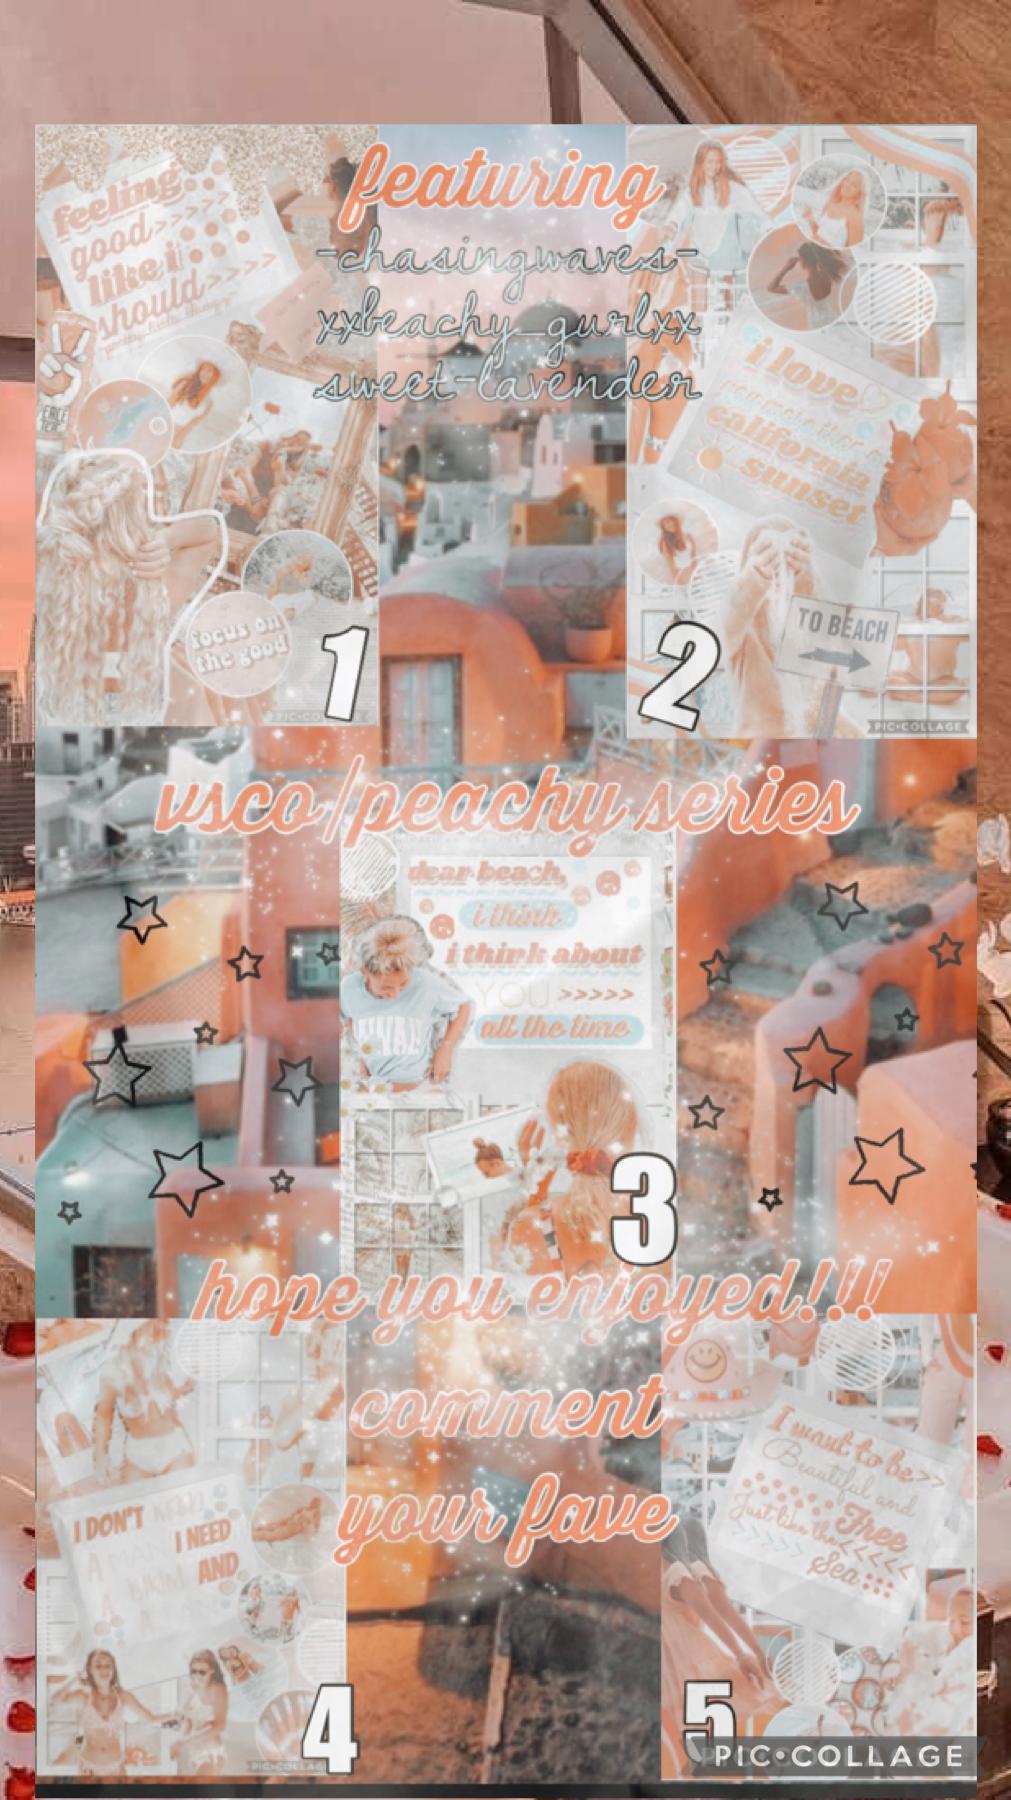 🍑tap🍑
i rlly loved this series and i hope y’all did too😚💓I rlly wanna know which was your fave so comment down below then go checkout these collages and give them a like! It would be much appreciated and i could know what style to do more of✨💕